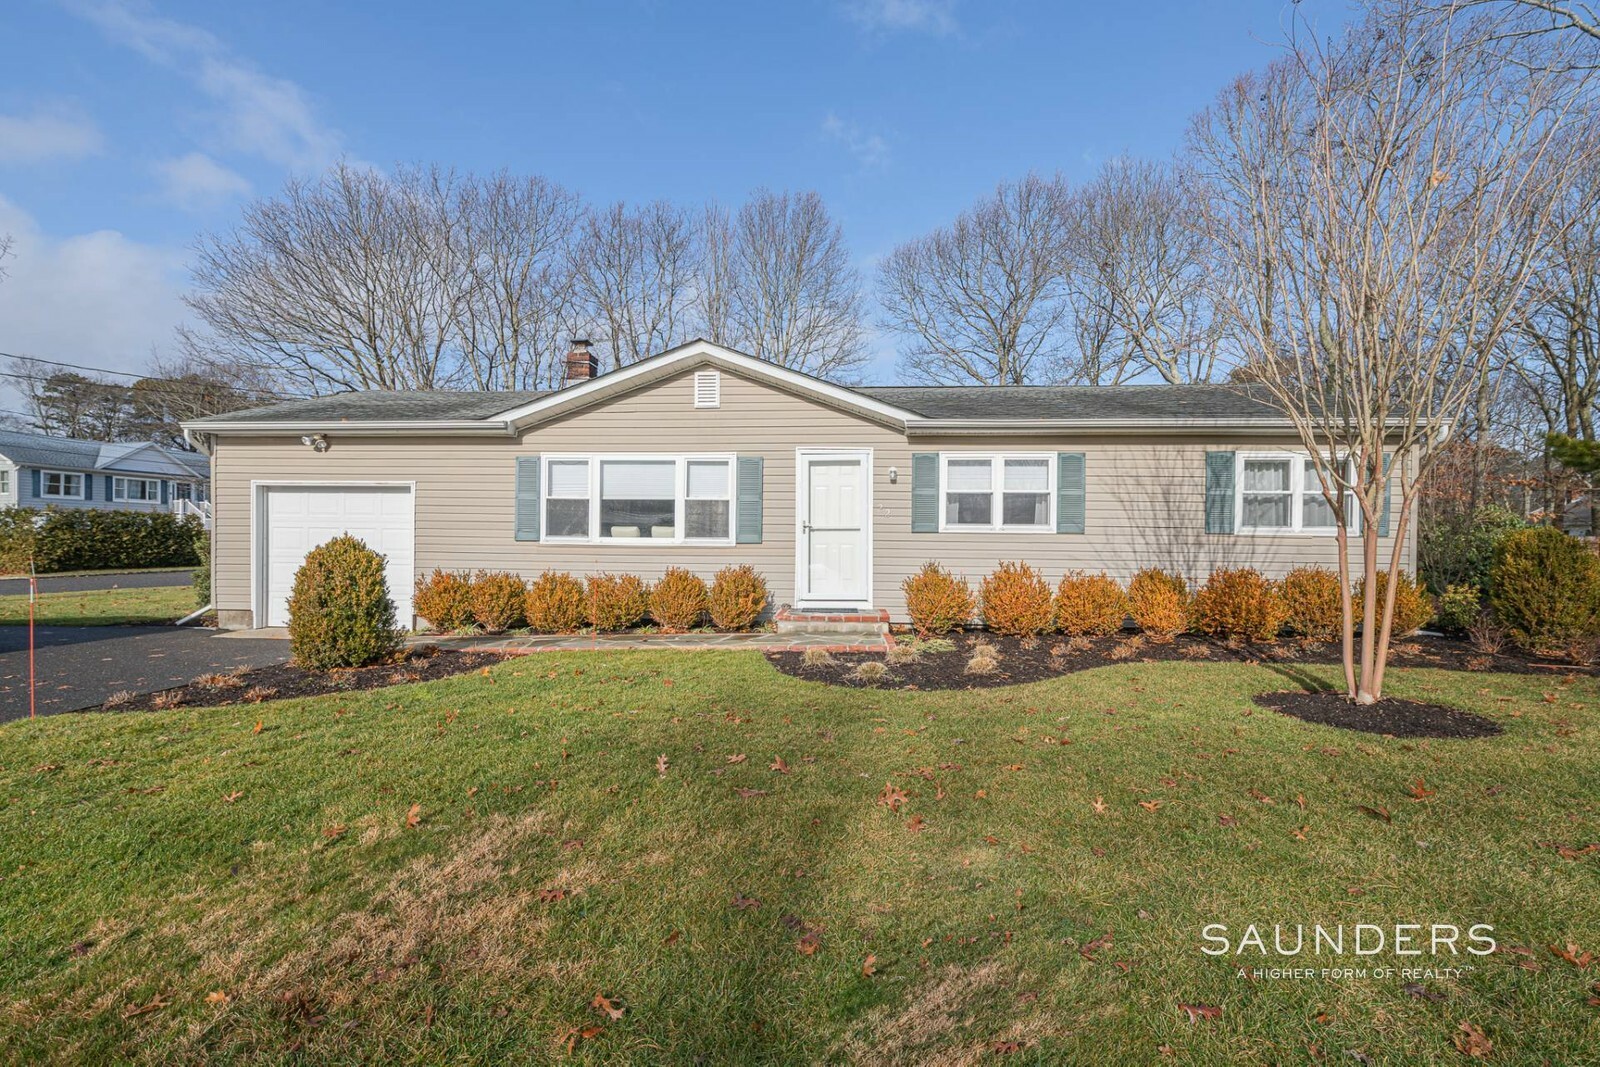 22 Holzman Drive in Hampton Bays, home to a nearly 1,200-square-foot house on .35 acres, is currently under contract, with a last listed price of $629,000. COURTESY SAUNDERS & ASSOCIATES